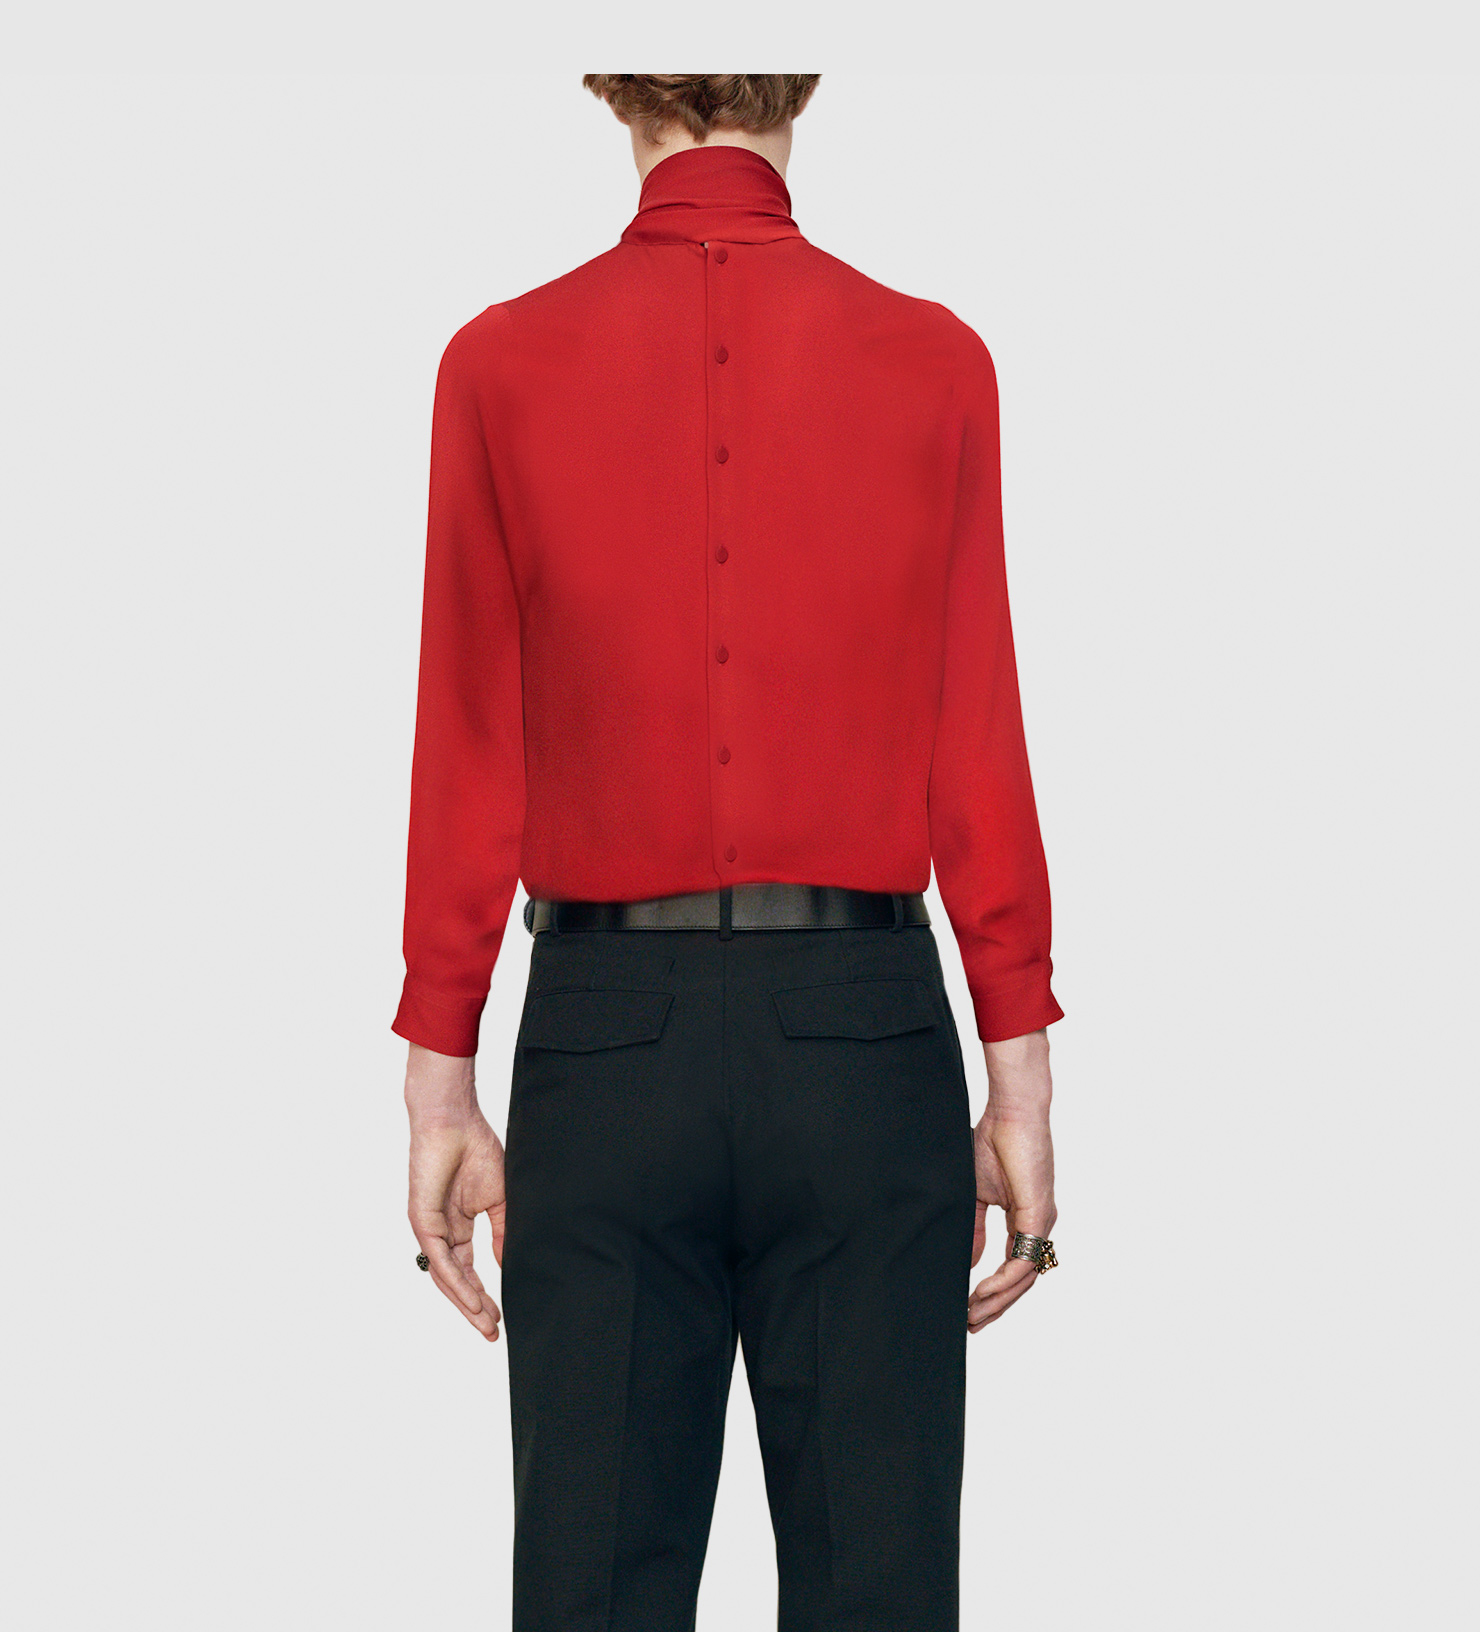 gucci blouse for women